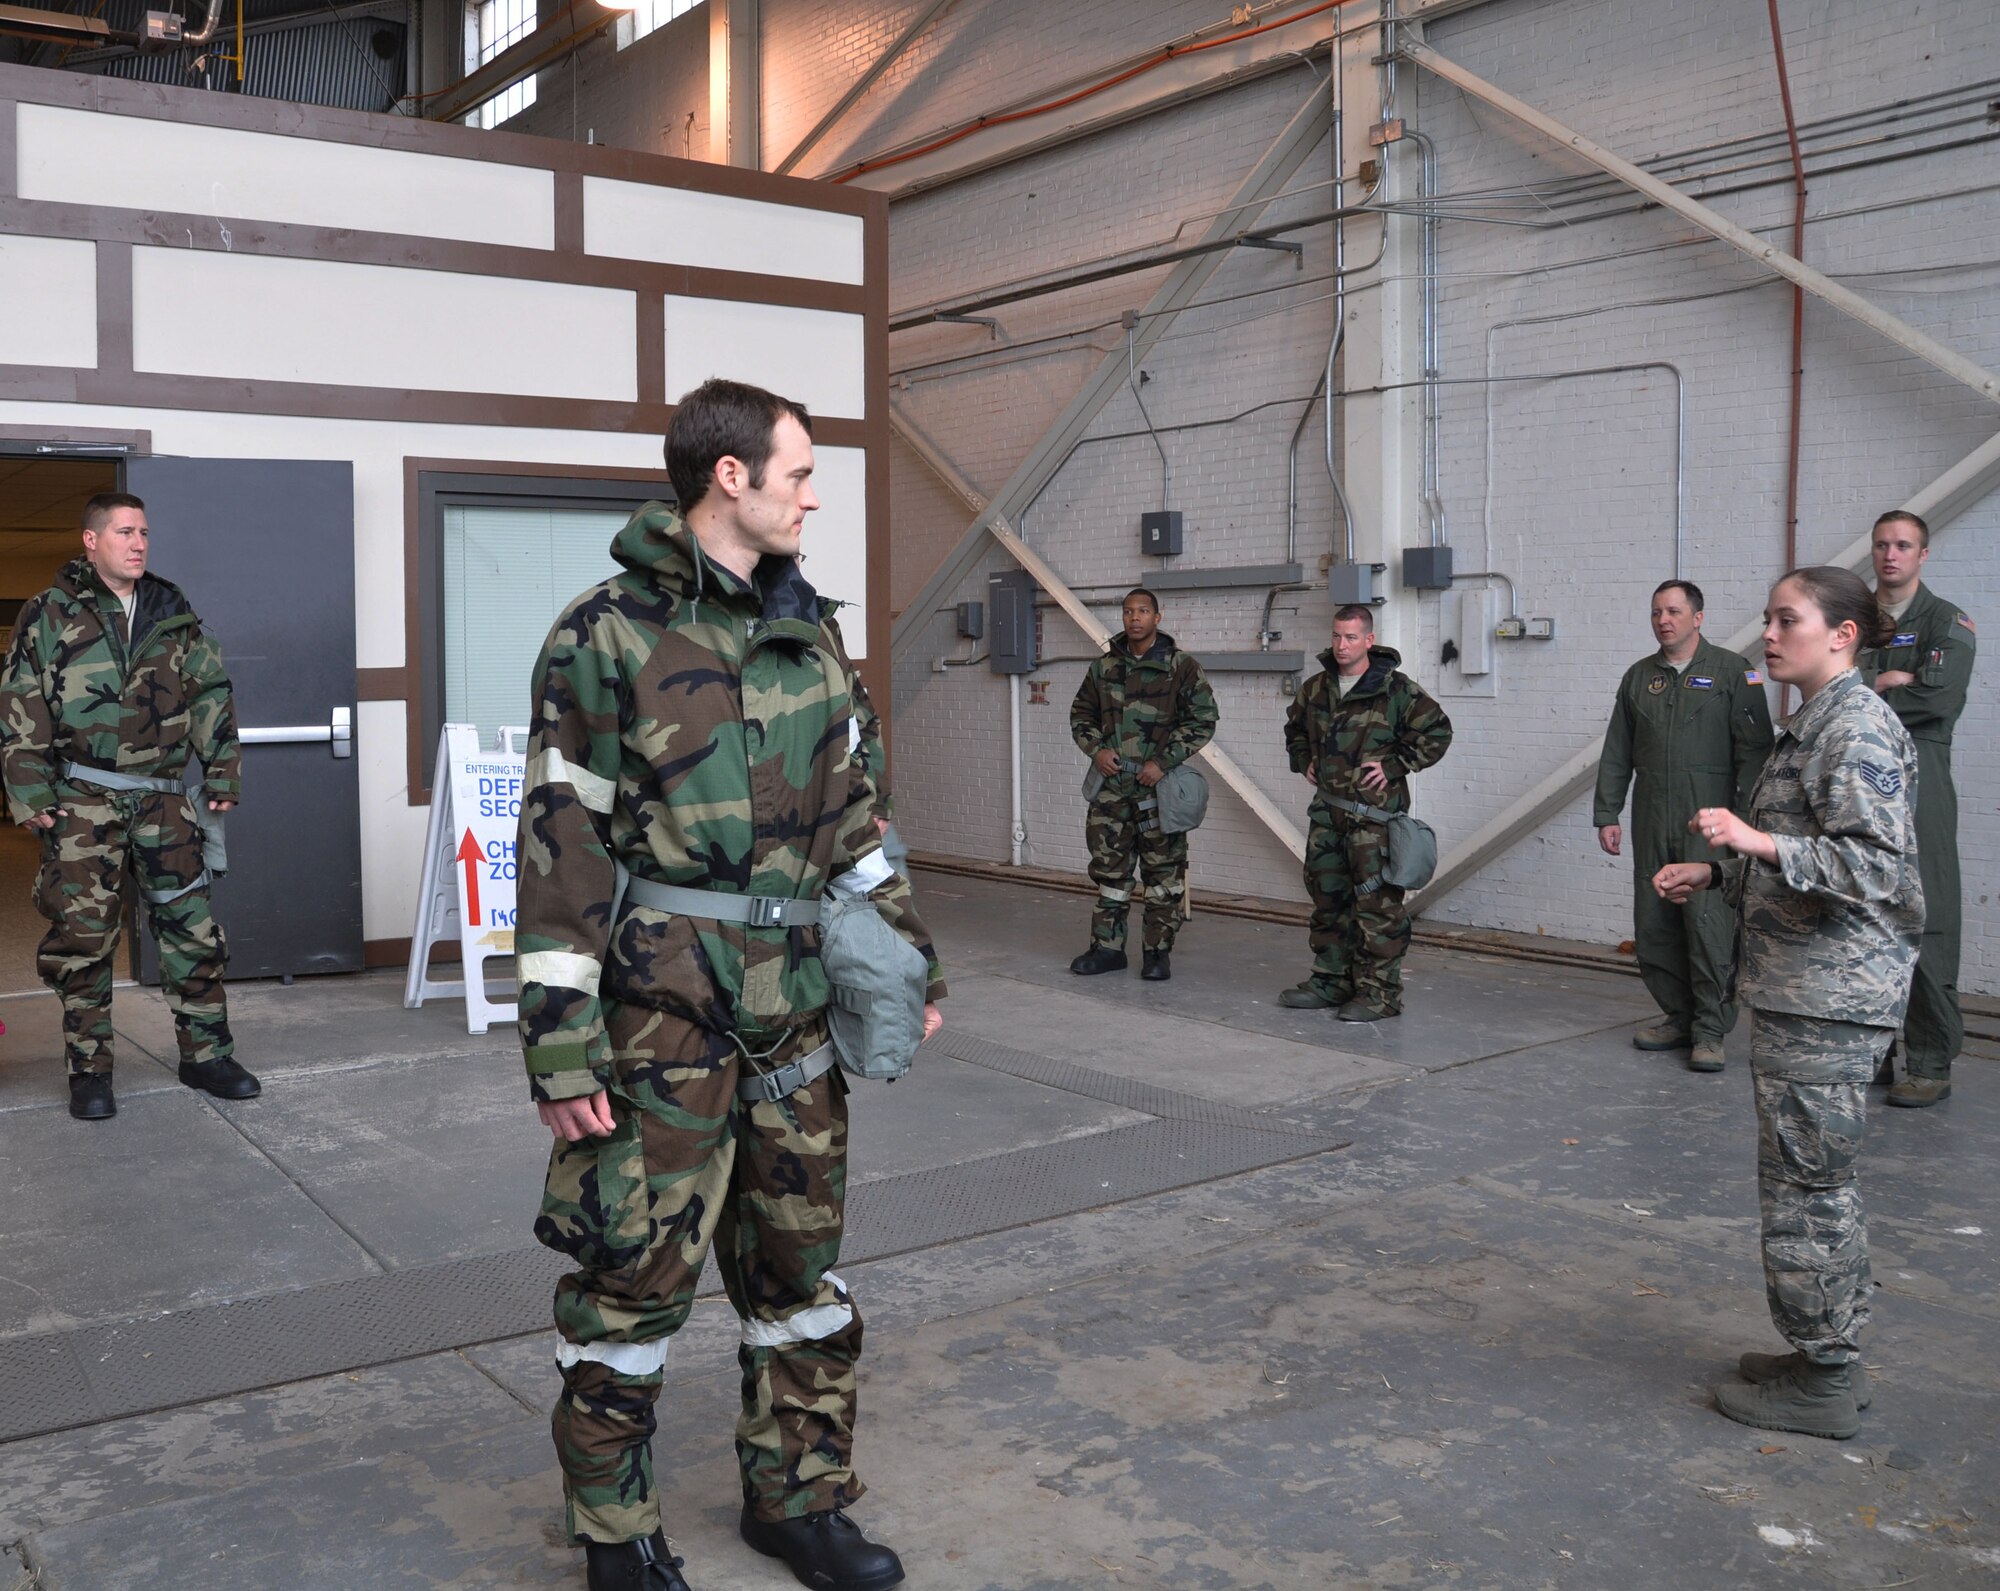 Members of the 931st Air Refueling Group participate in a hazardous material clearing scenario during a CBRNE training session April 12, 2015, McConnell Air Force Base, The training teaches the Airmen how to react should they encounter any chemical, biological, radiological/nuclear or explosive operations (U.S. Air Force photo by Tech. Sgt. Abigail Klein)